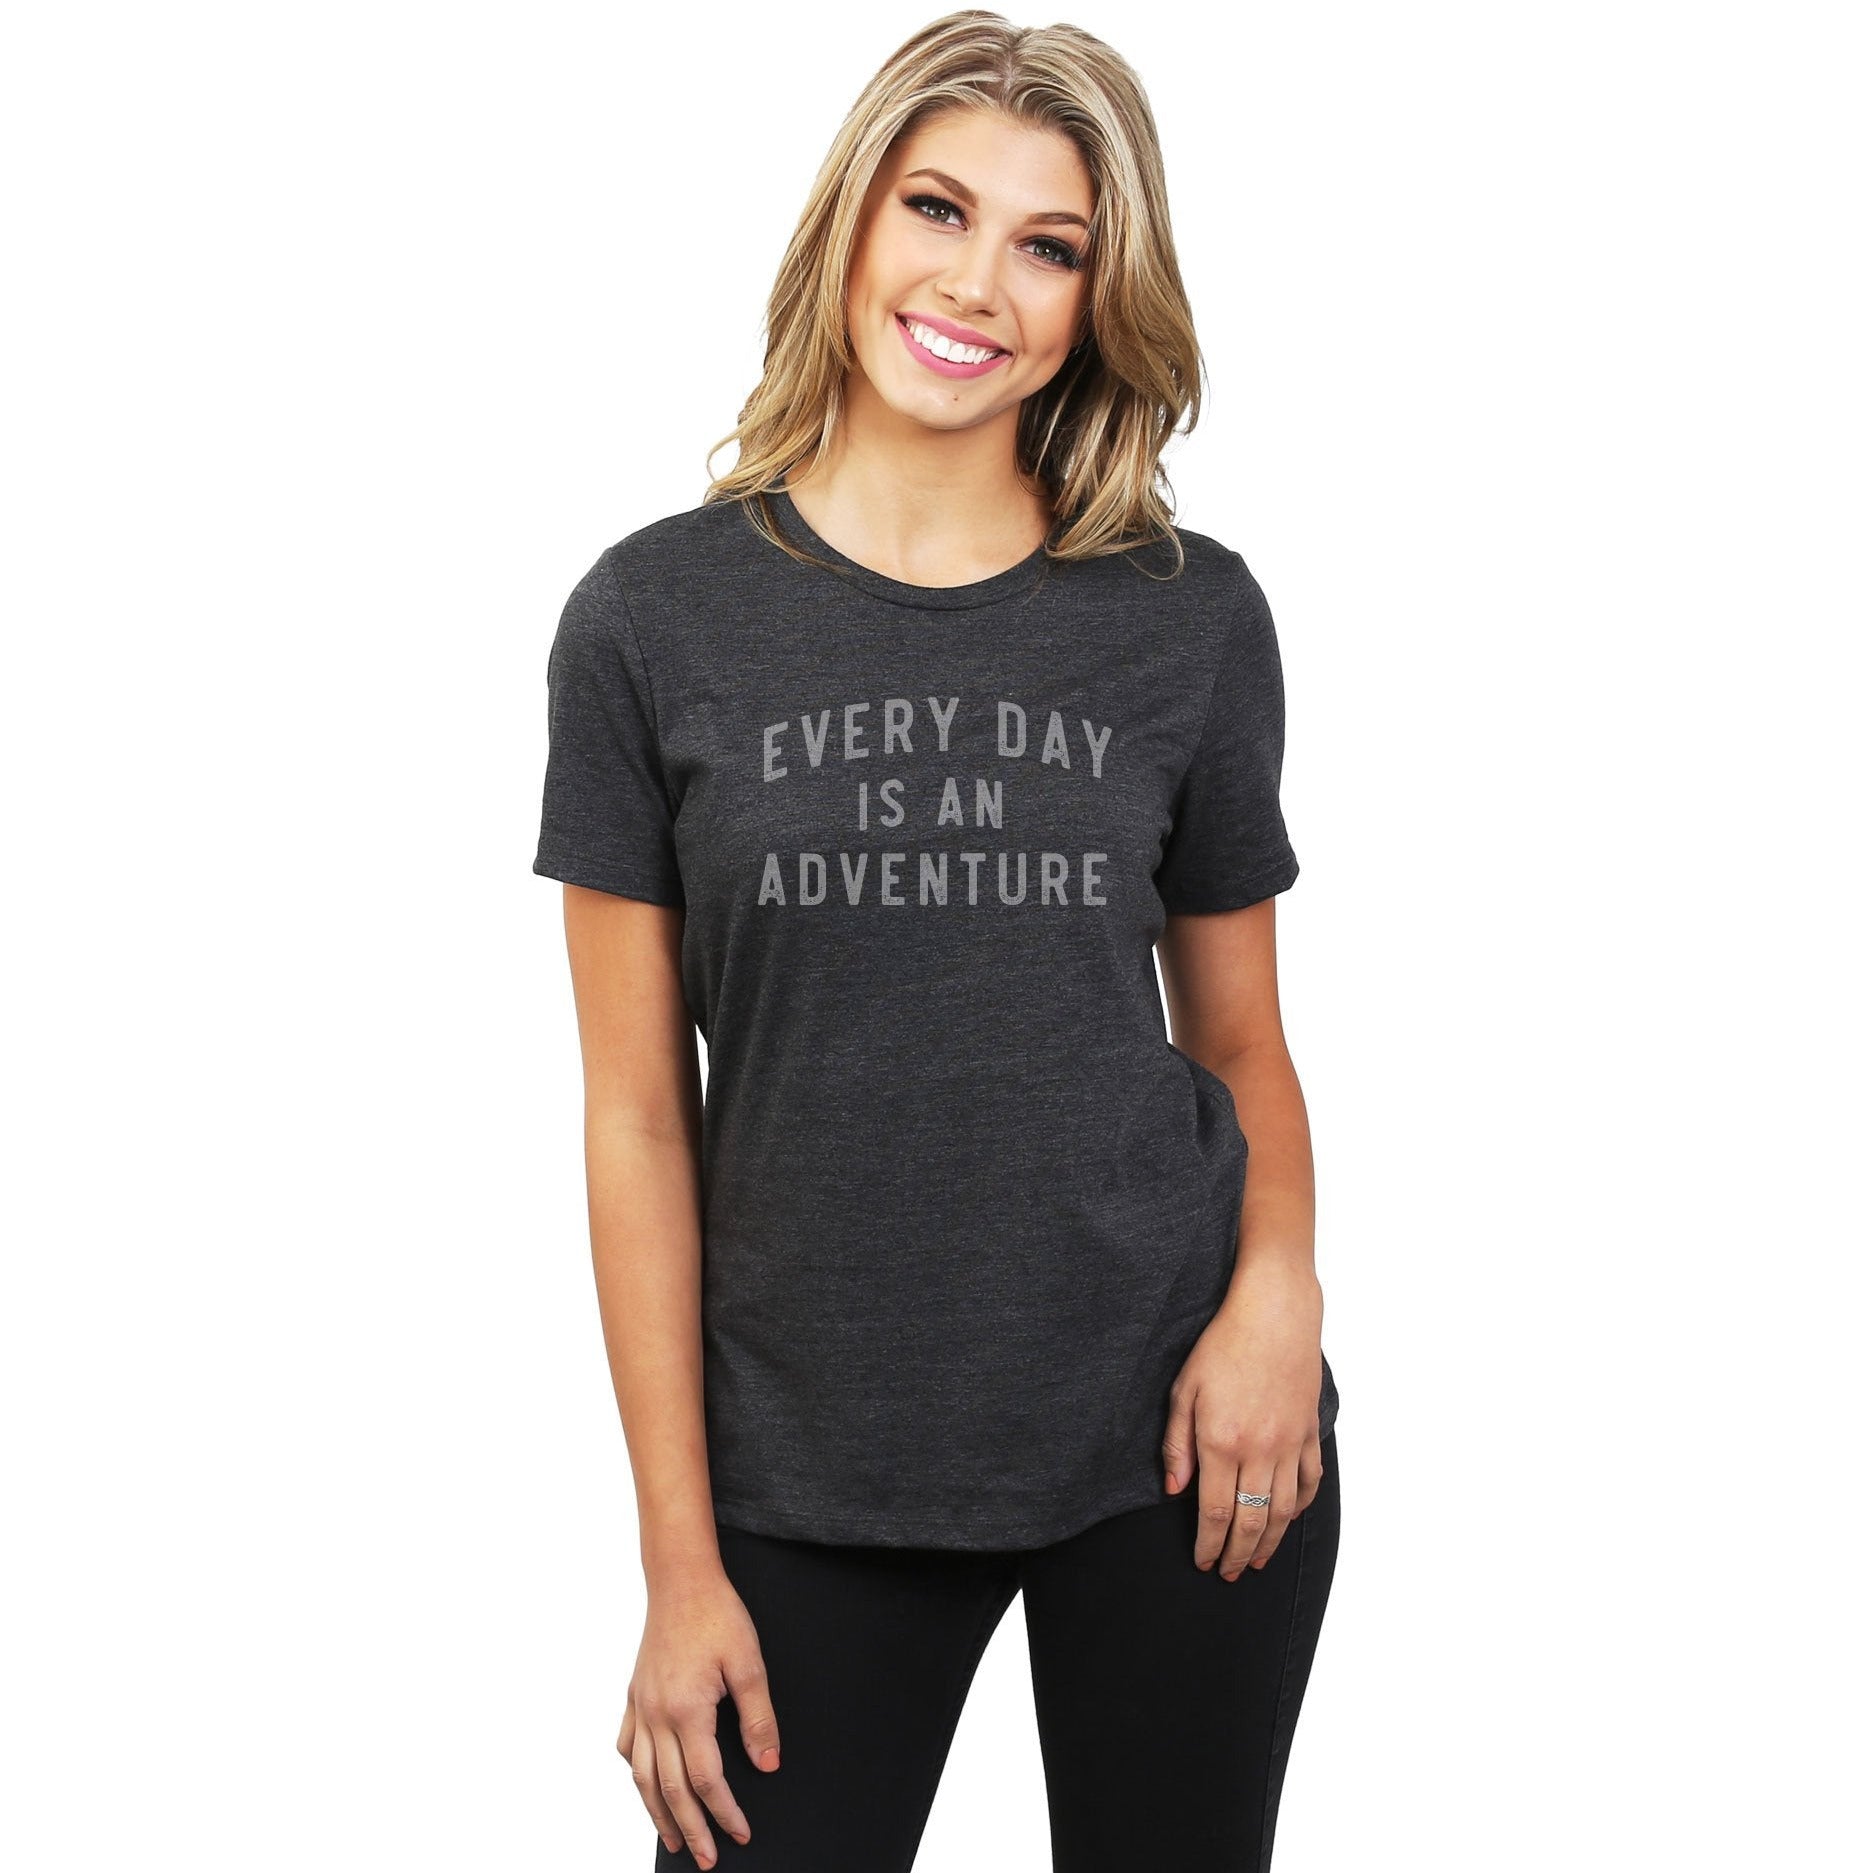 Everyday Is An Adventure Women's Relaxed Crewneck T-Shirt Top Tee Charcoal Model
